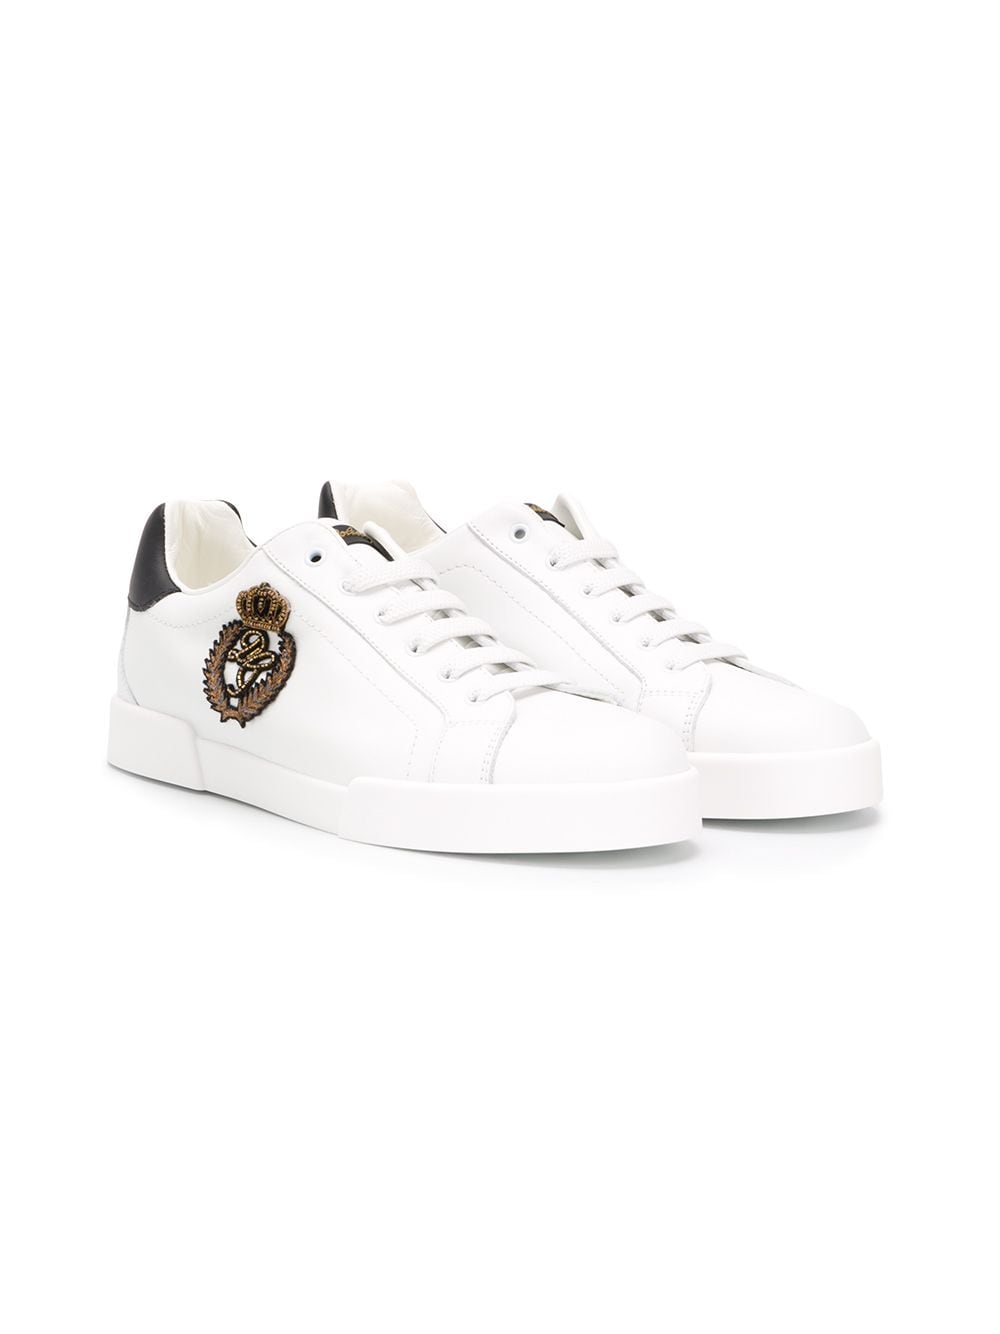 DOLCE & GABBANA TEEN PATCH-EMBELLISHED SNEAKERS